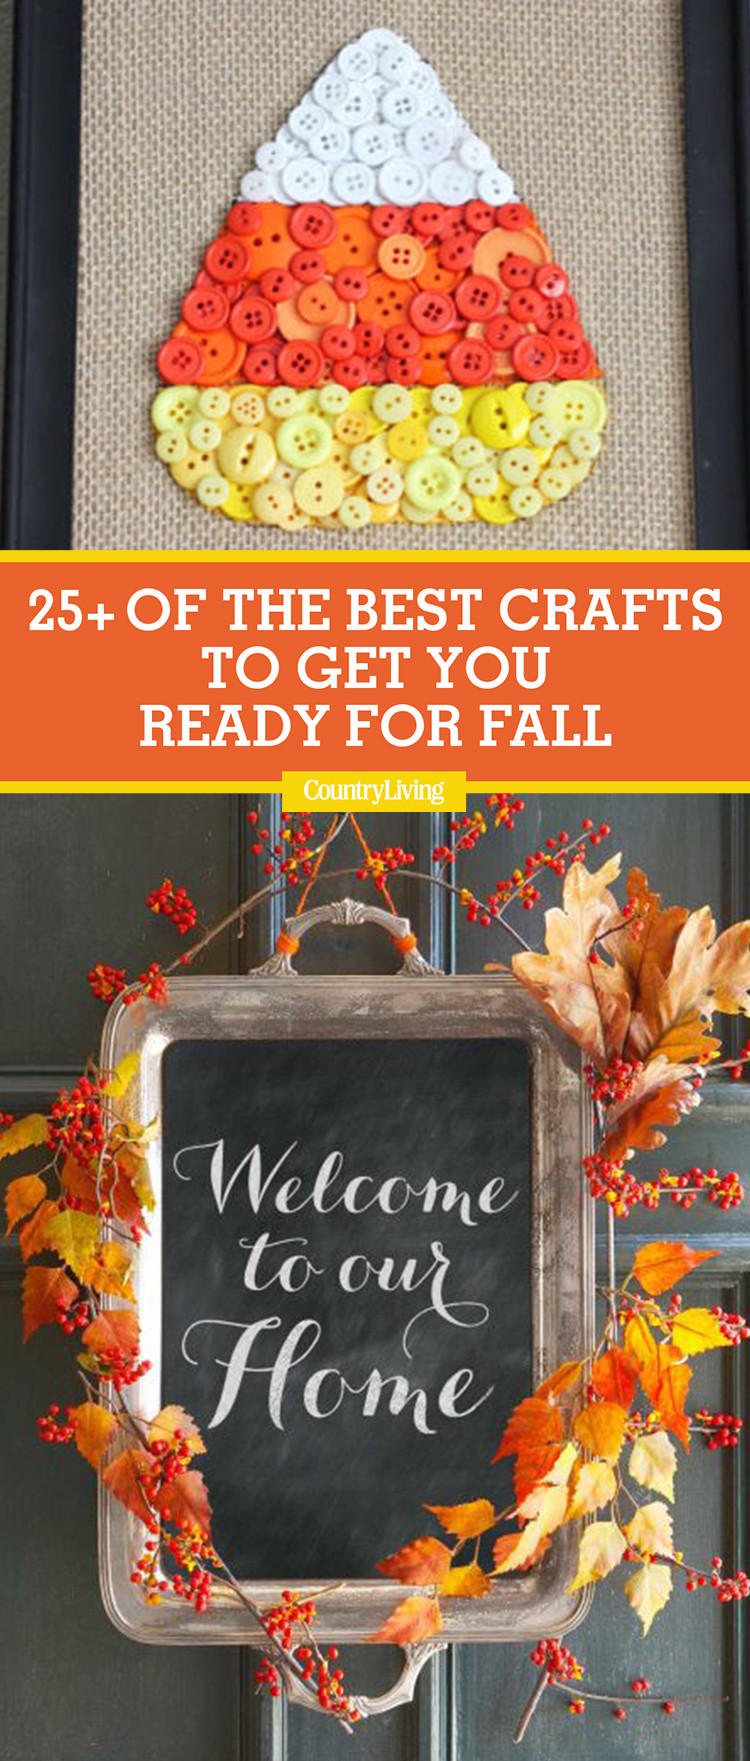 Fall Crafts Pinterest
 25 Best Fall Crafts Easy DIY Home Decor Ideas for Fall